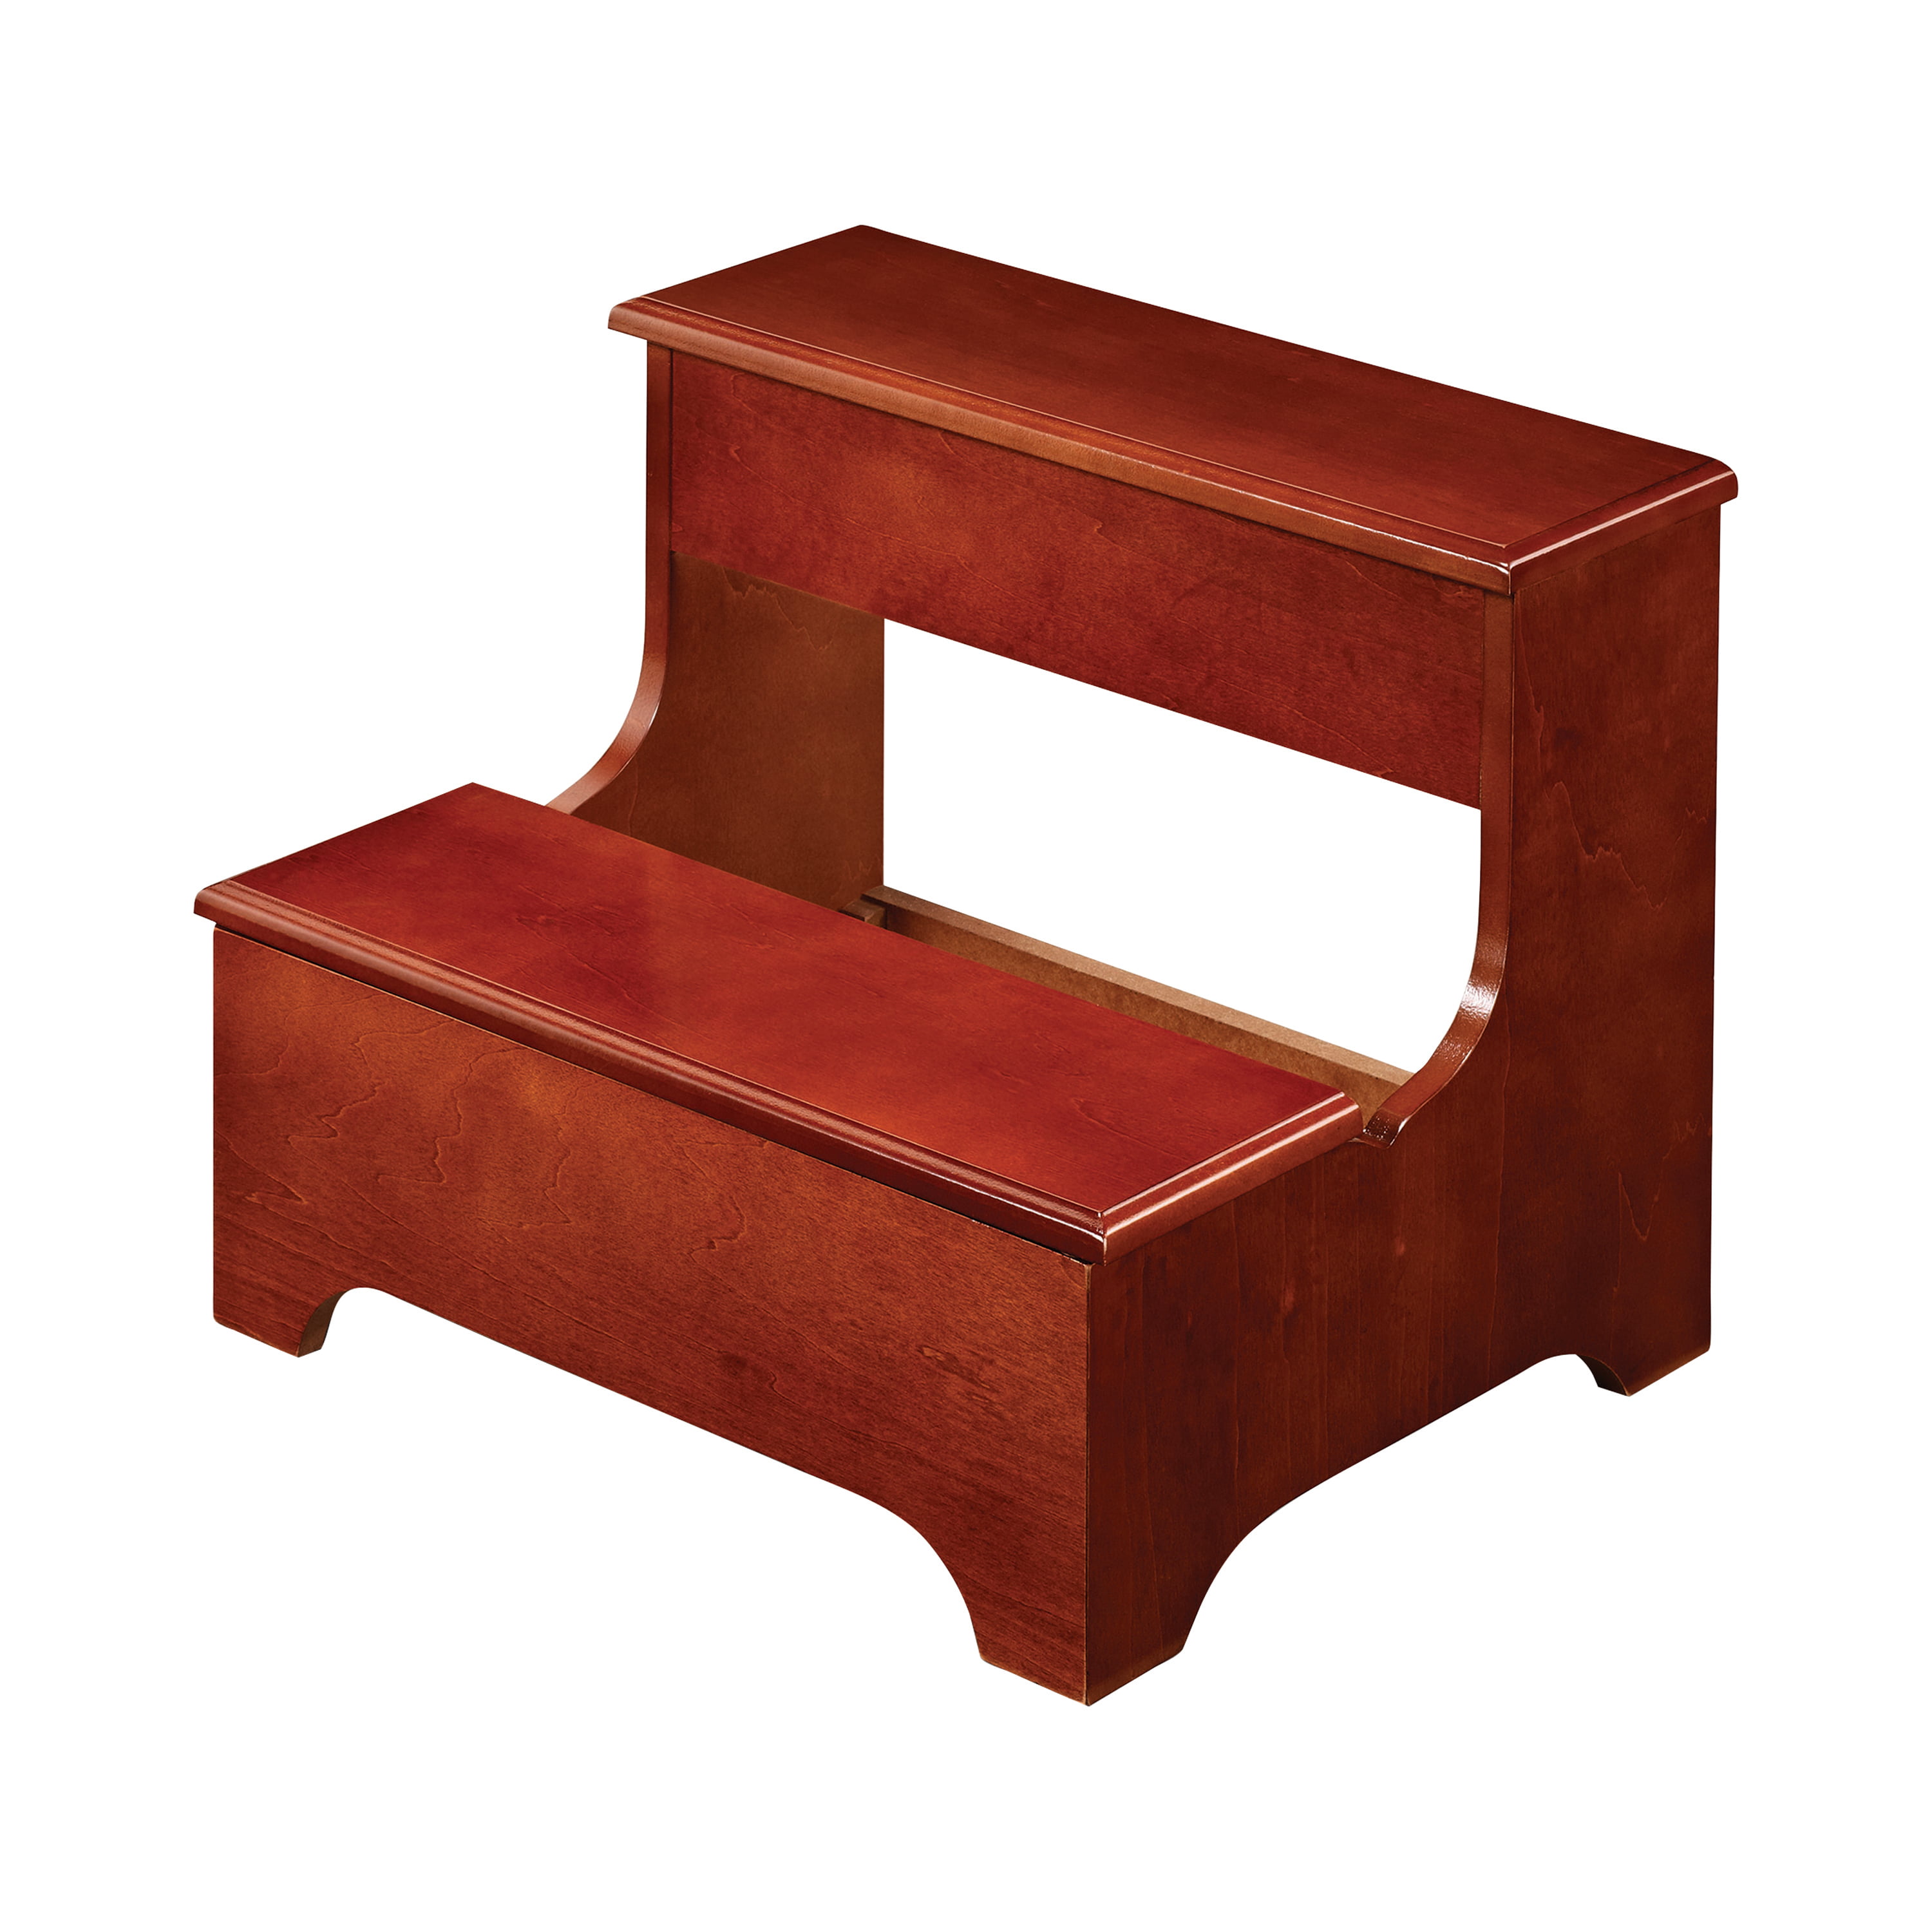 Kings Brand Dark Cherry Finish Wood Bedroom Step Stool With Sto.. Free Shipping 